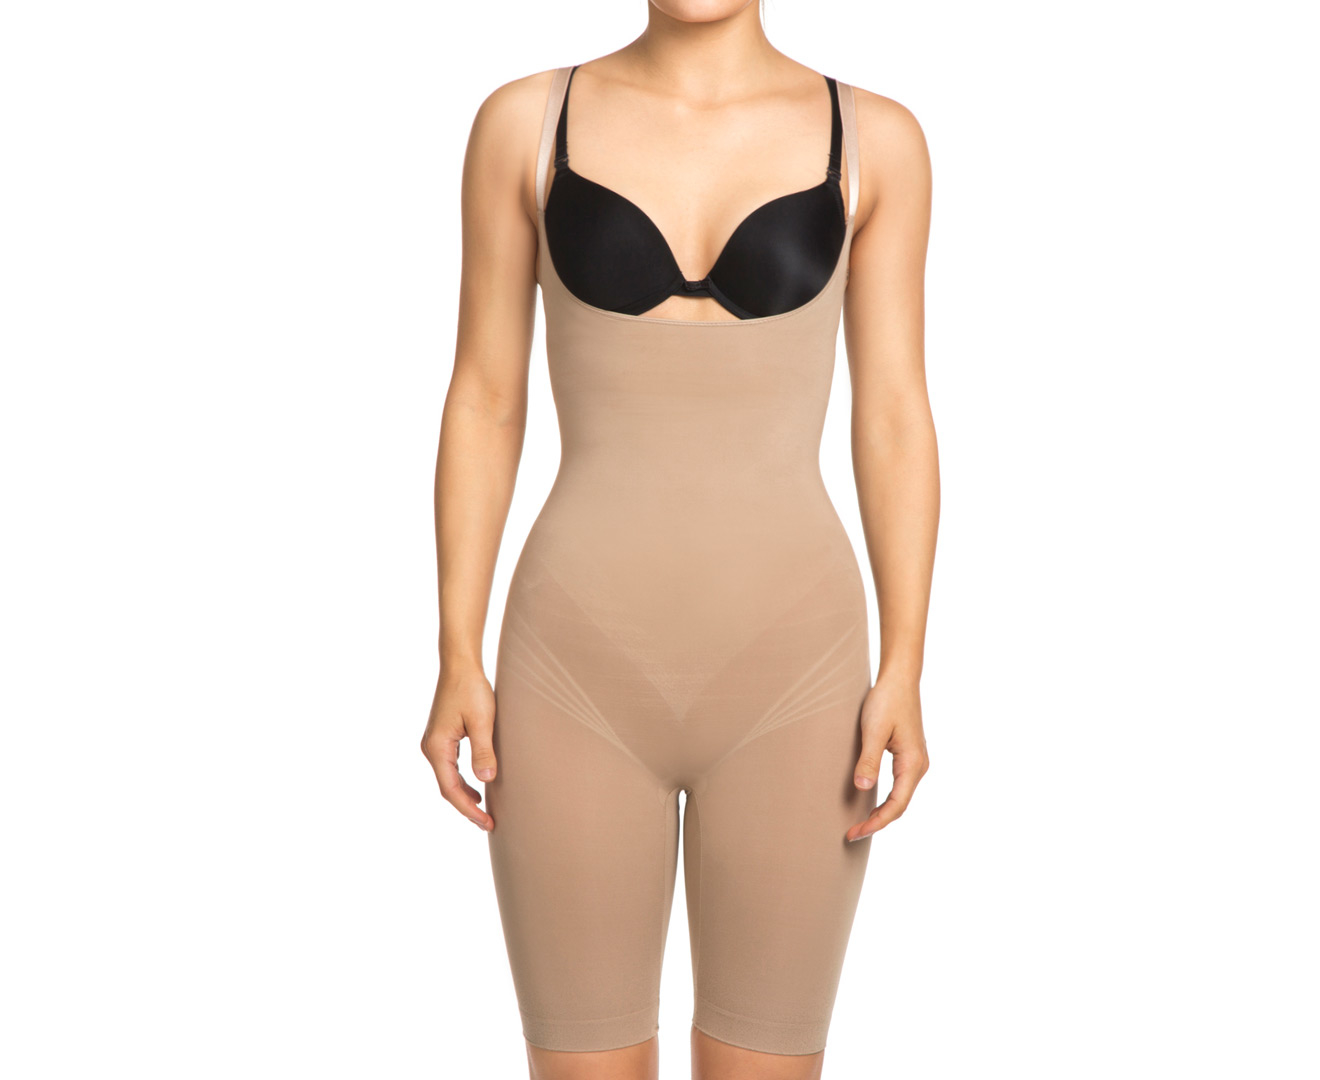 Hold Me Tight Shapewear Second Skin Seamless Bodysuit - Mocca